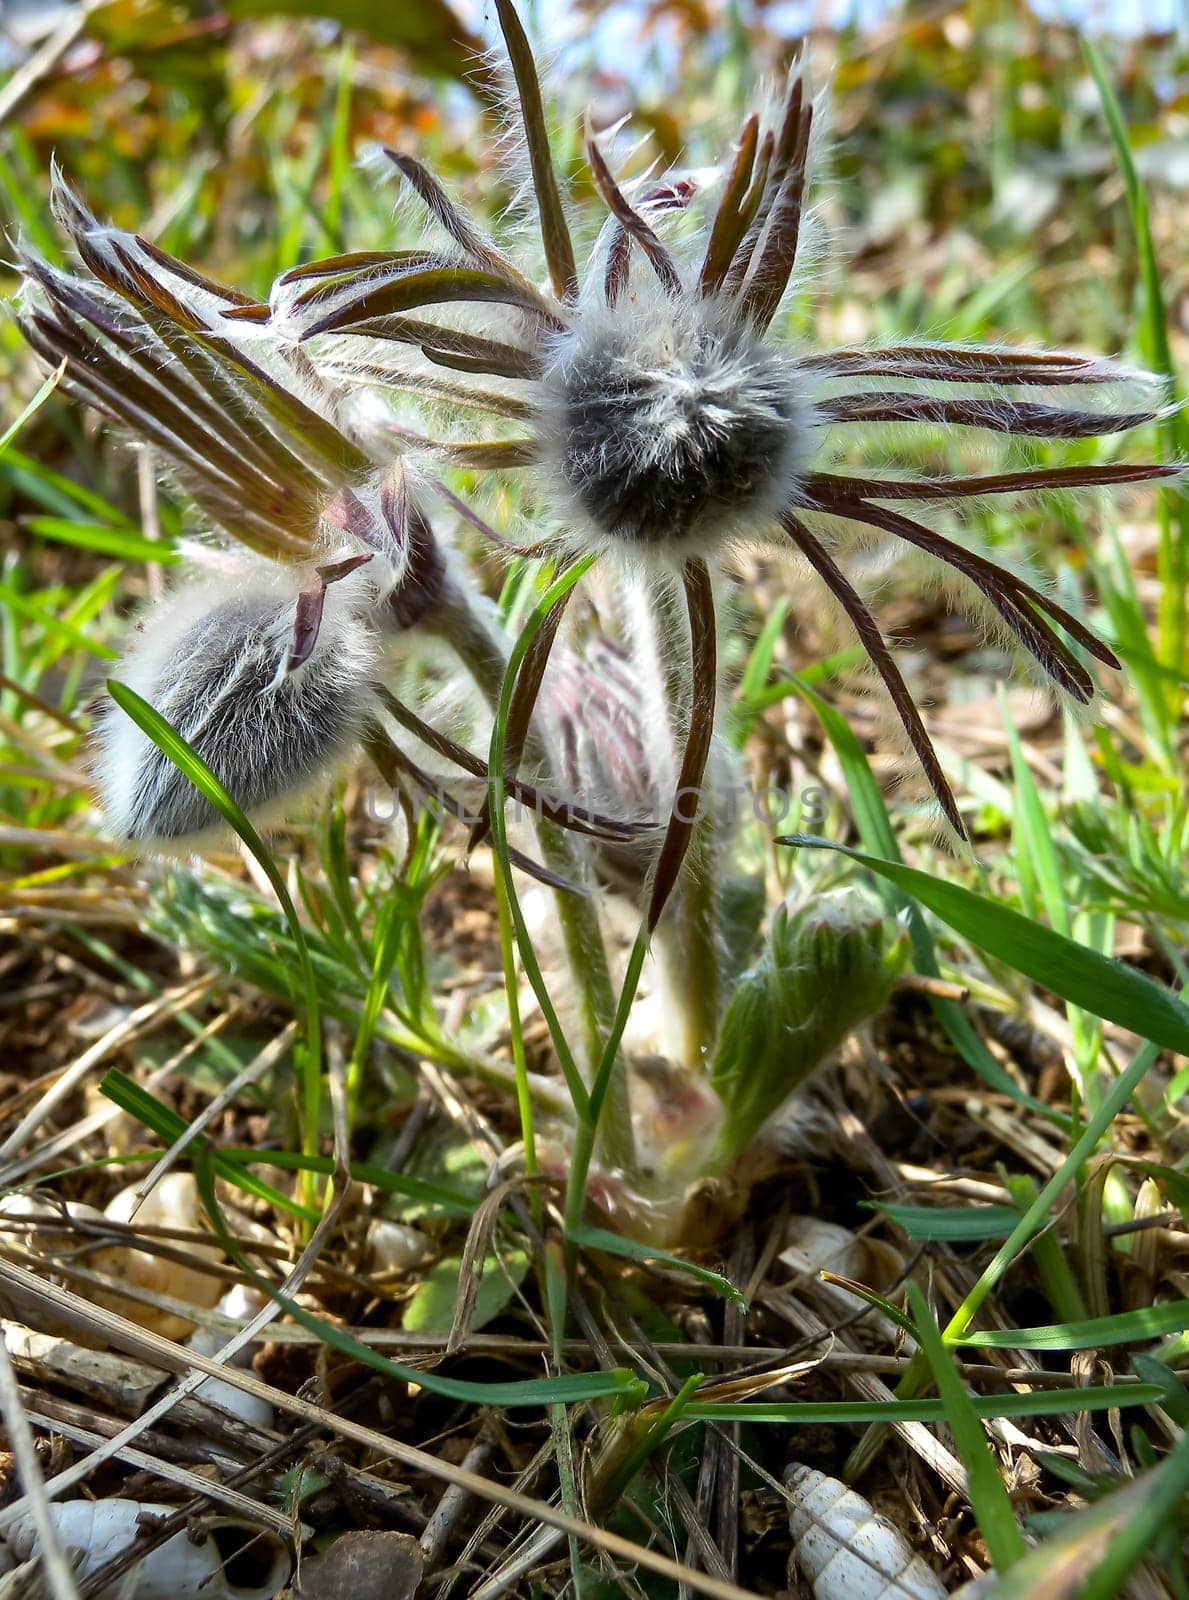 Eastern pasqueflower, cutleaf anemone (Pulsatilla patens) blooming in spring among the grass in the wild by Hydrobiolog